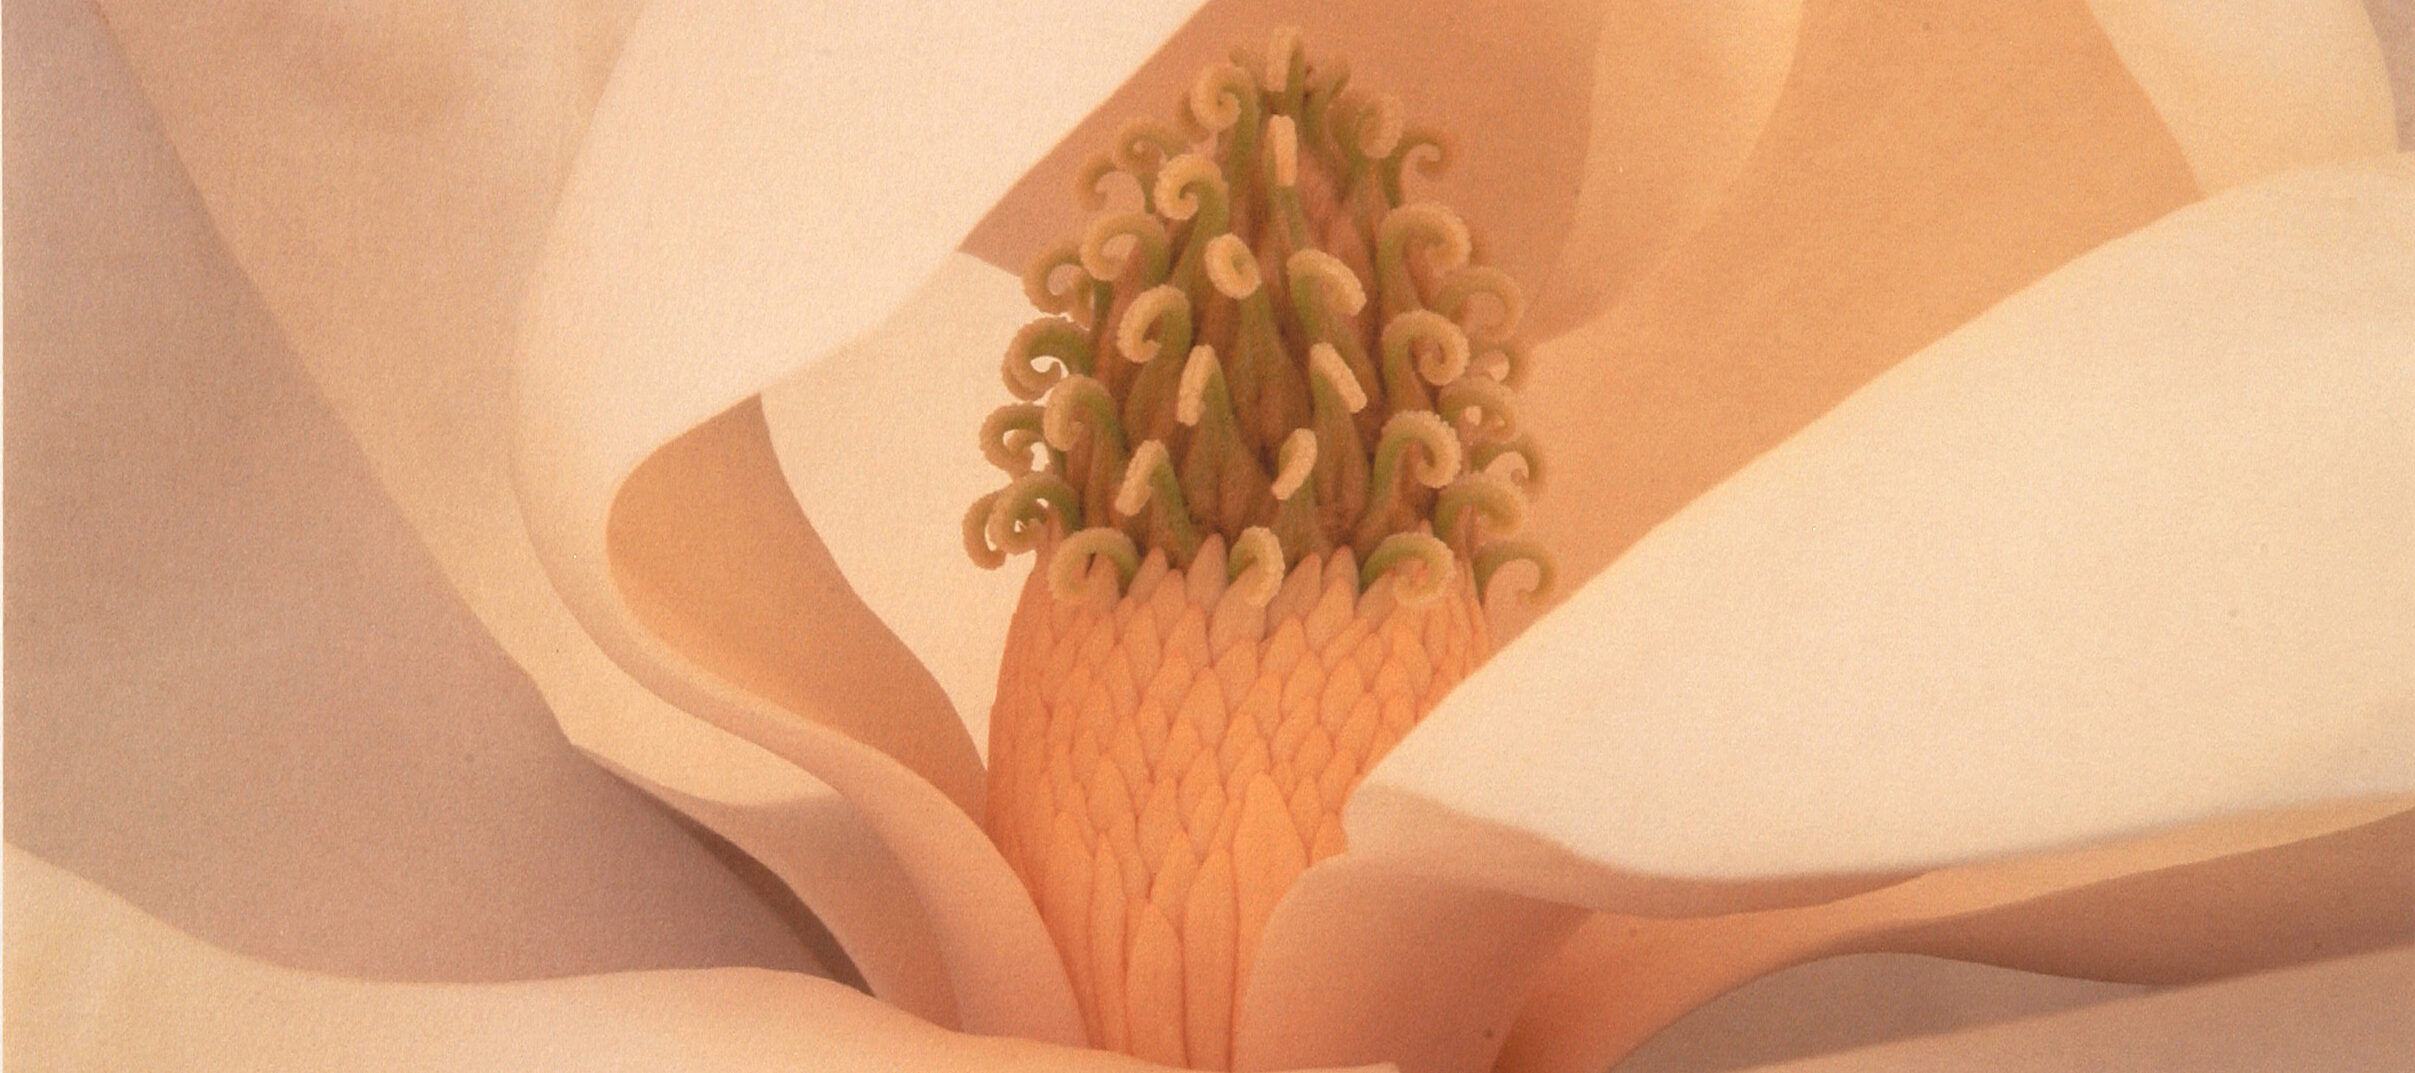 Close up photograph of the inside of a pale pink magnolia flower. The petals appear gauzey and the stamen is made of delicate curled pieces atop a coral base.